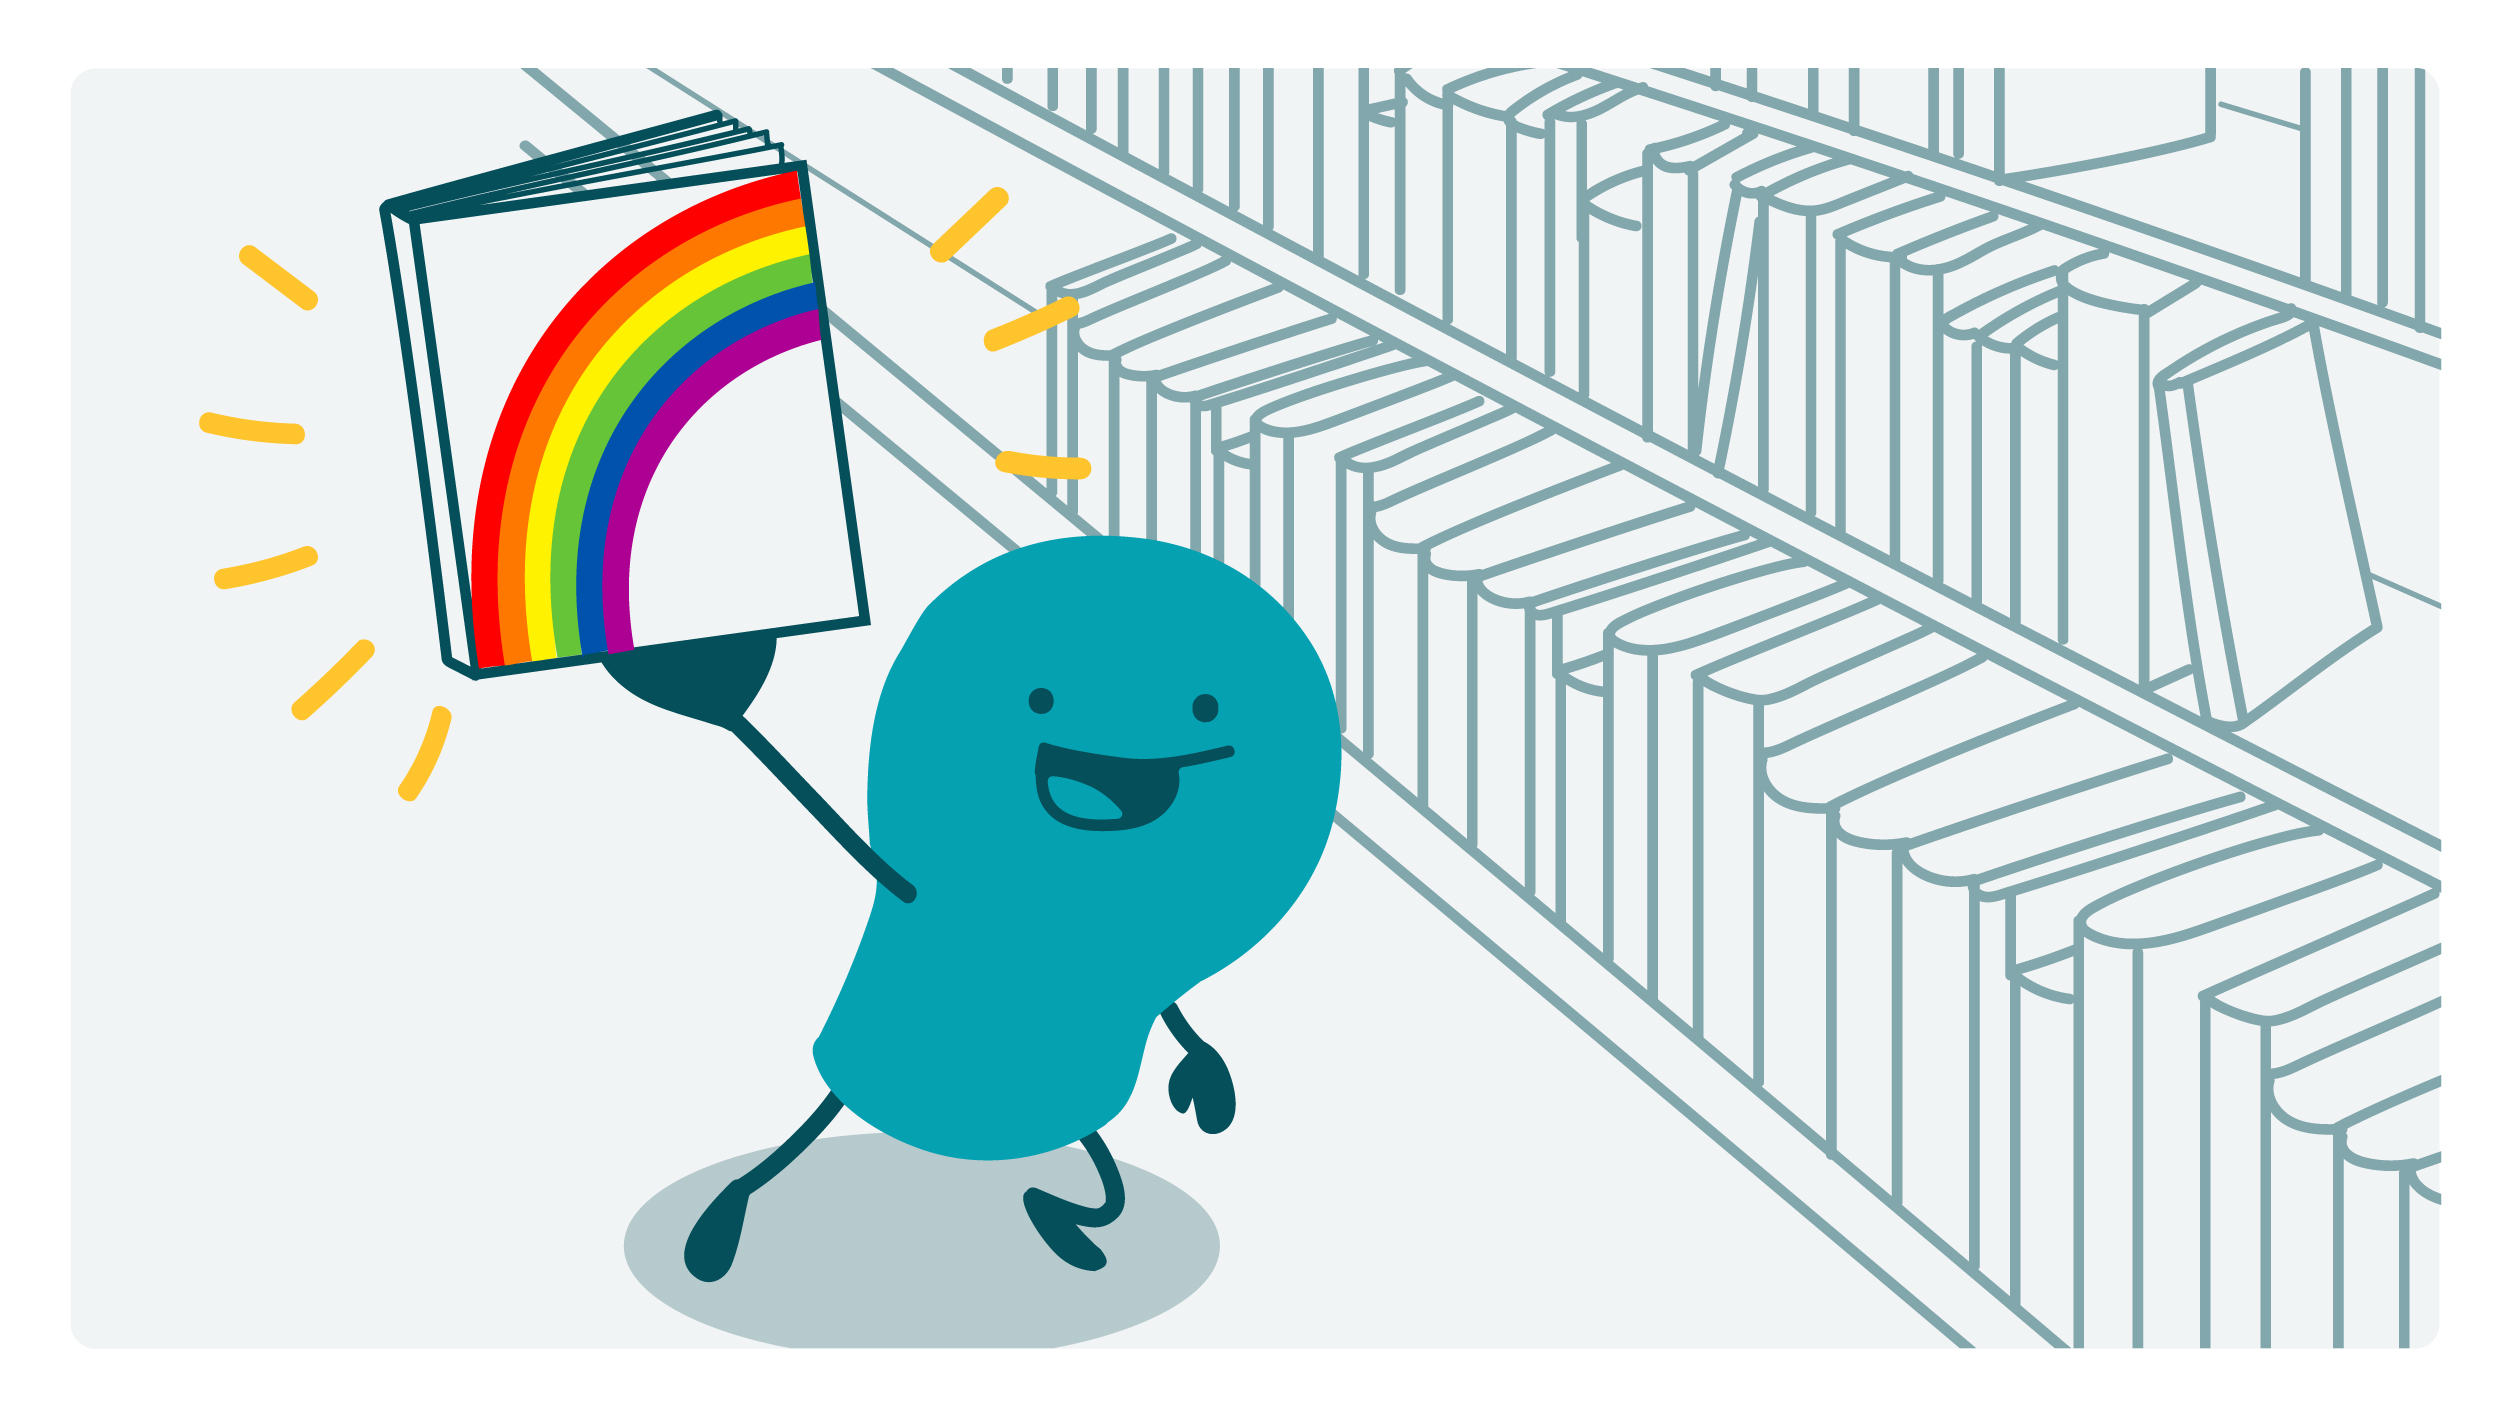 A doodle in a library holding up a book with a rainbow on it.